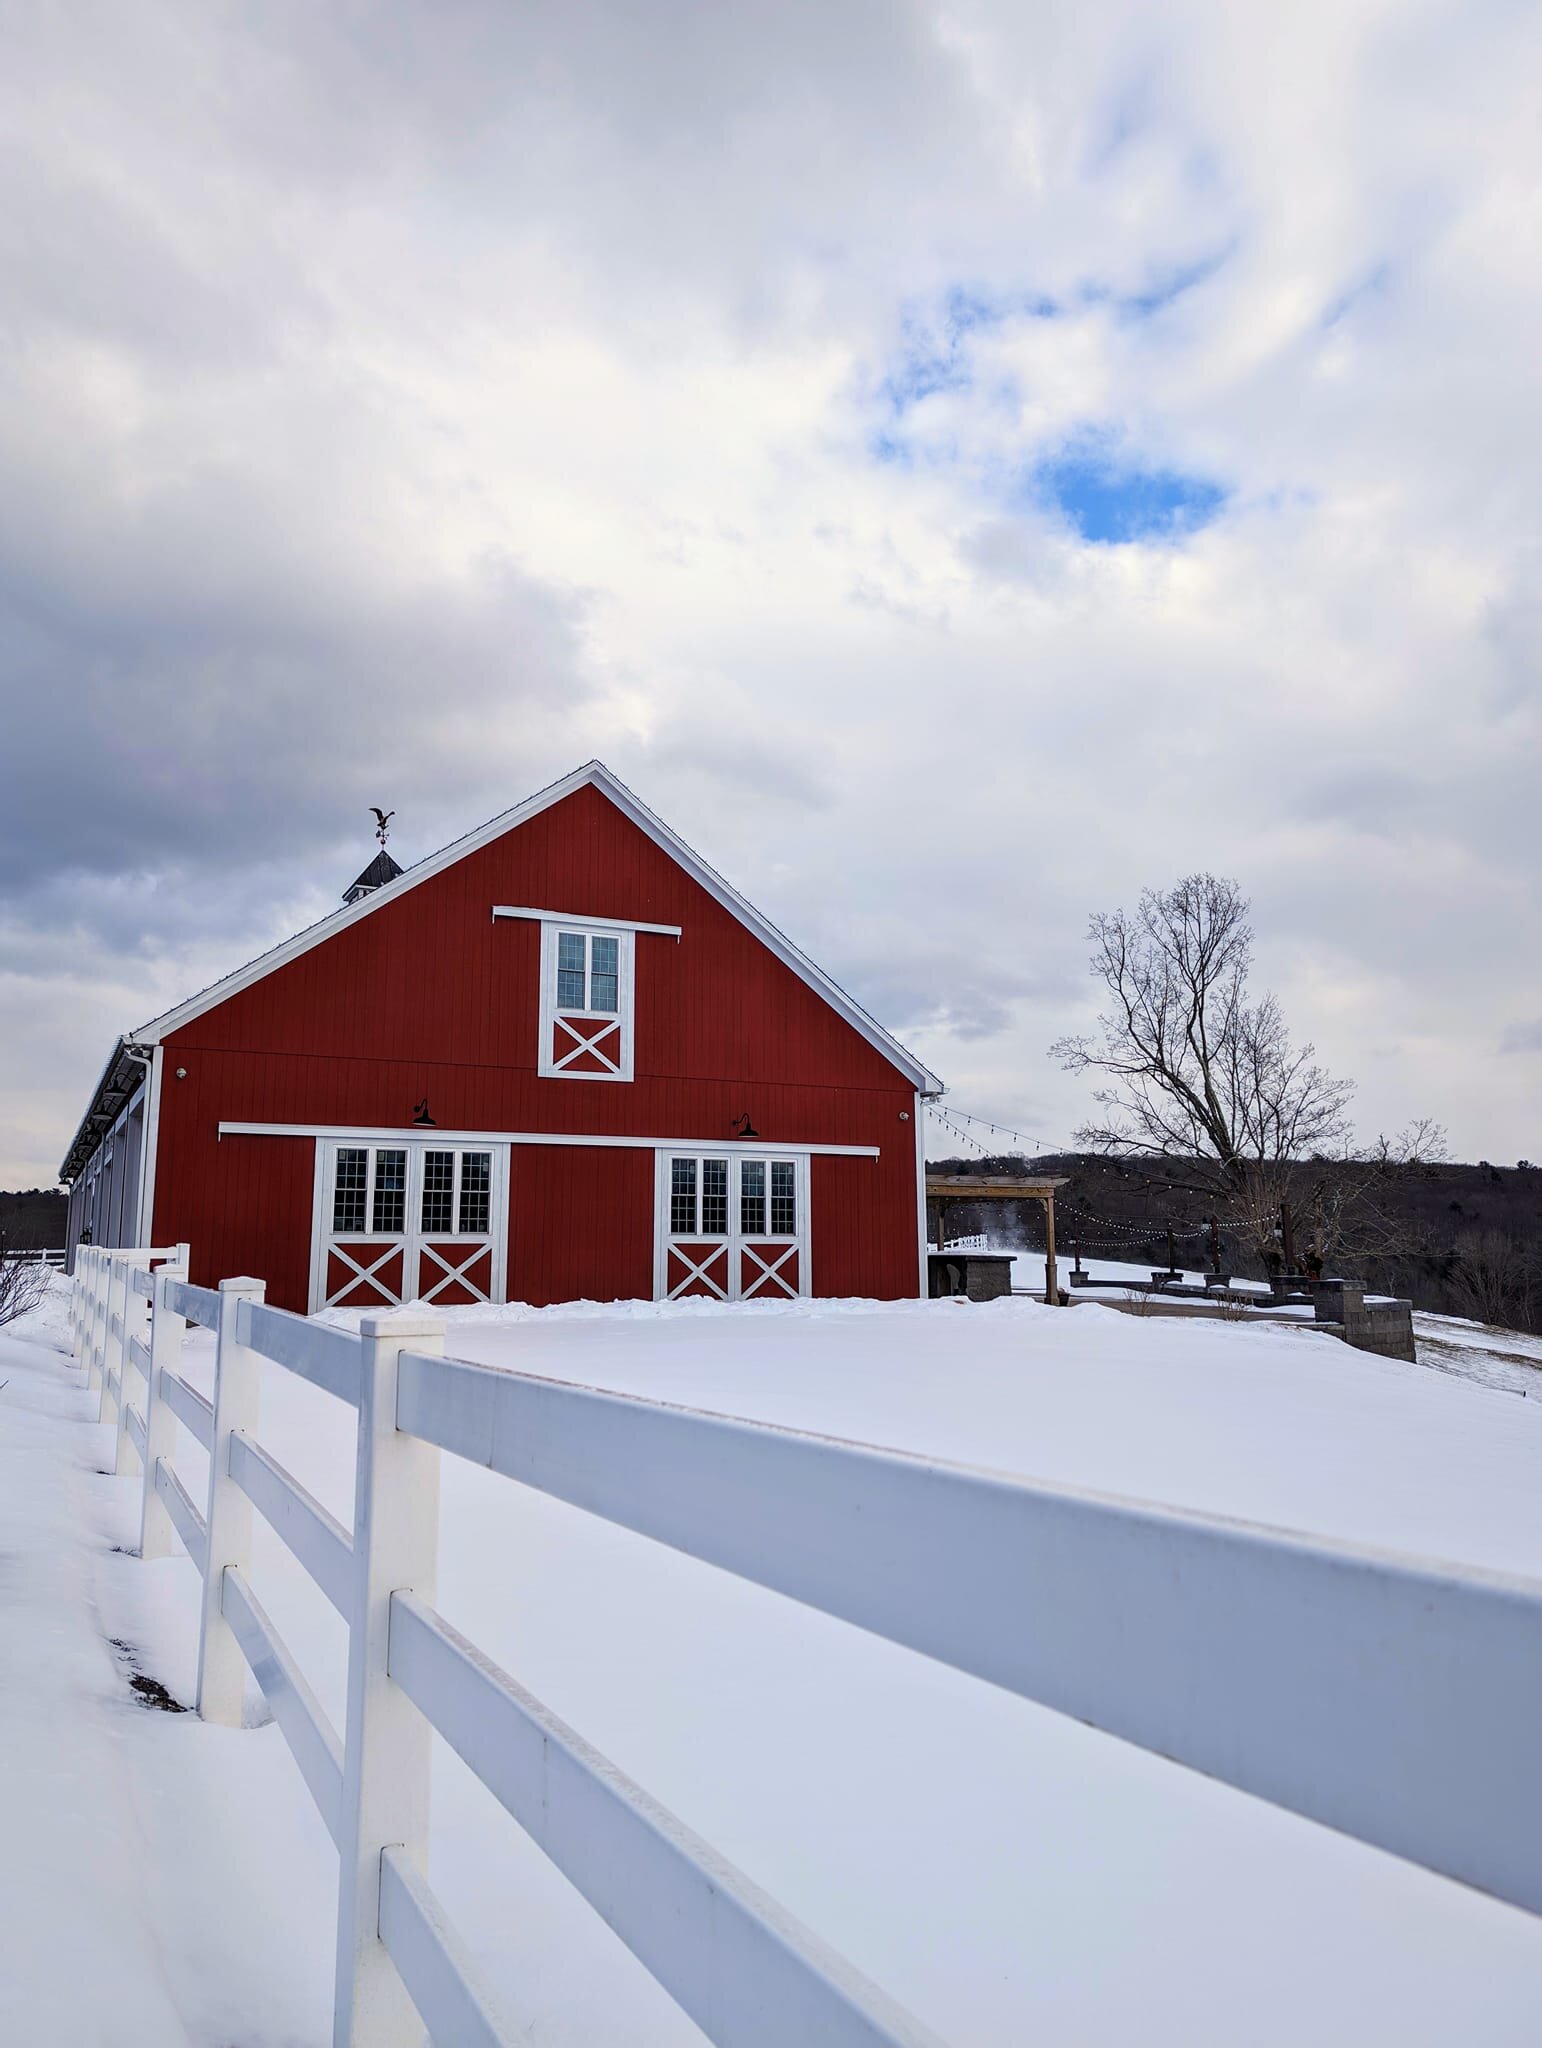 The farm is so pretty with snow!